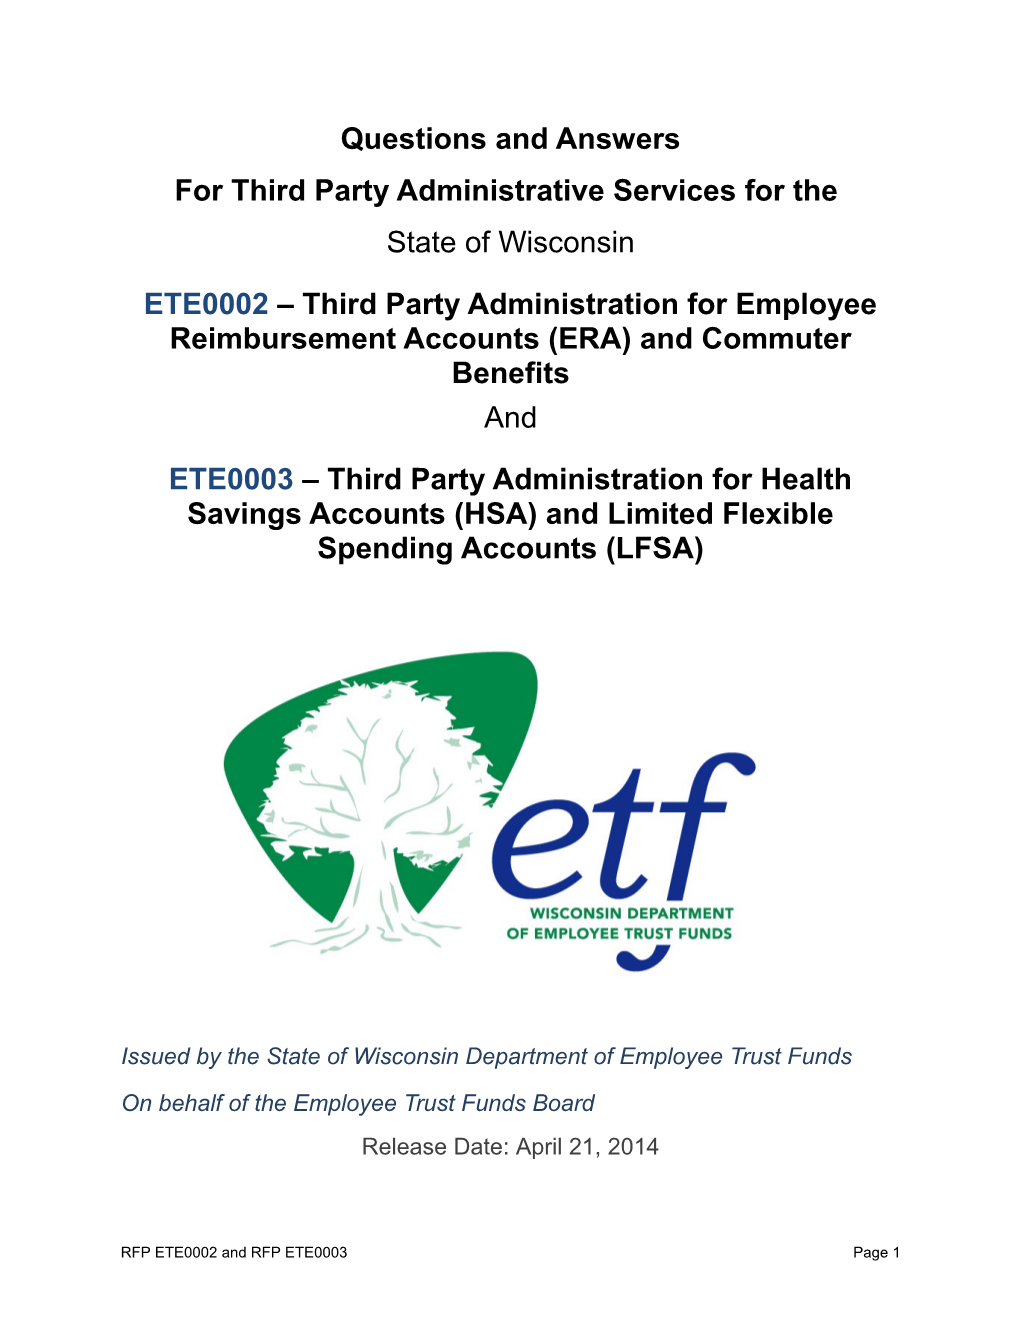 For Third Party Administrative Services for The